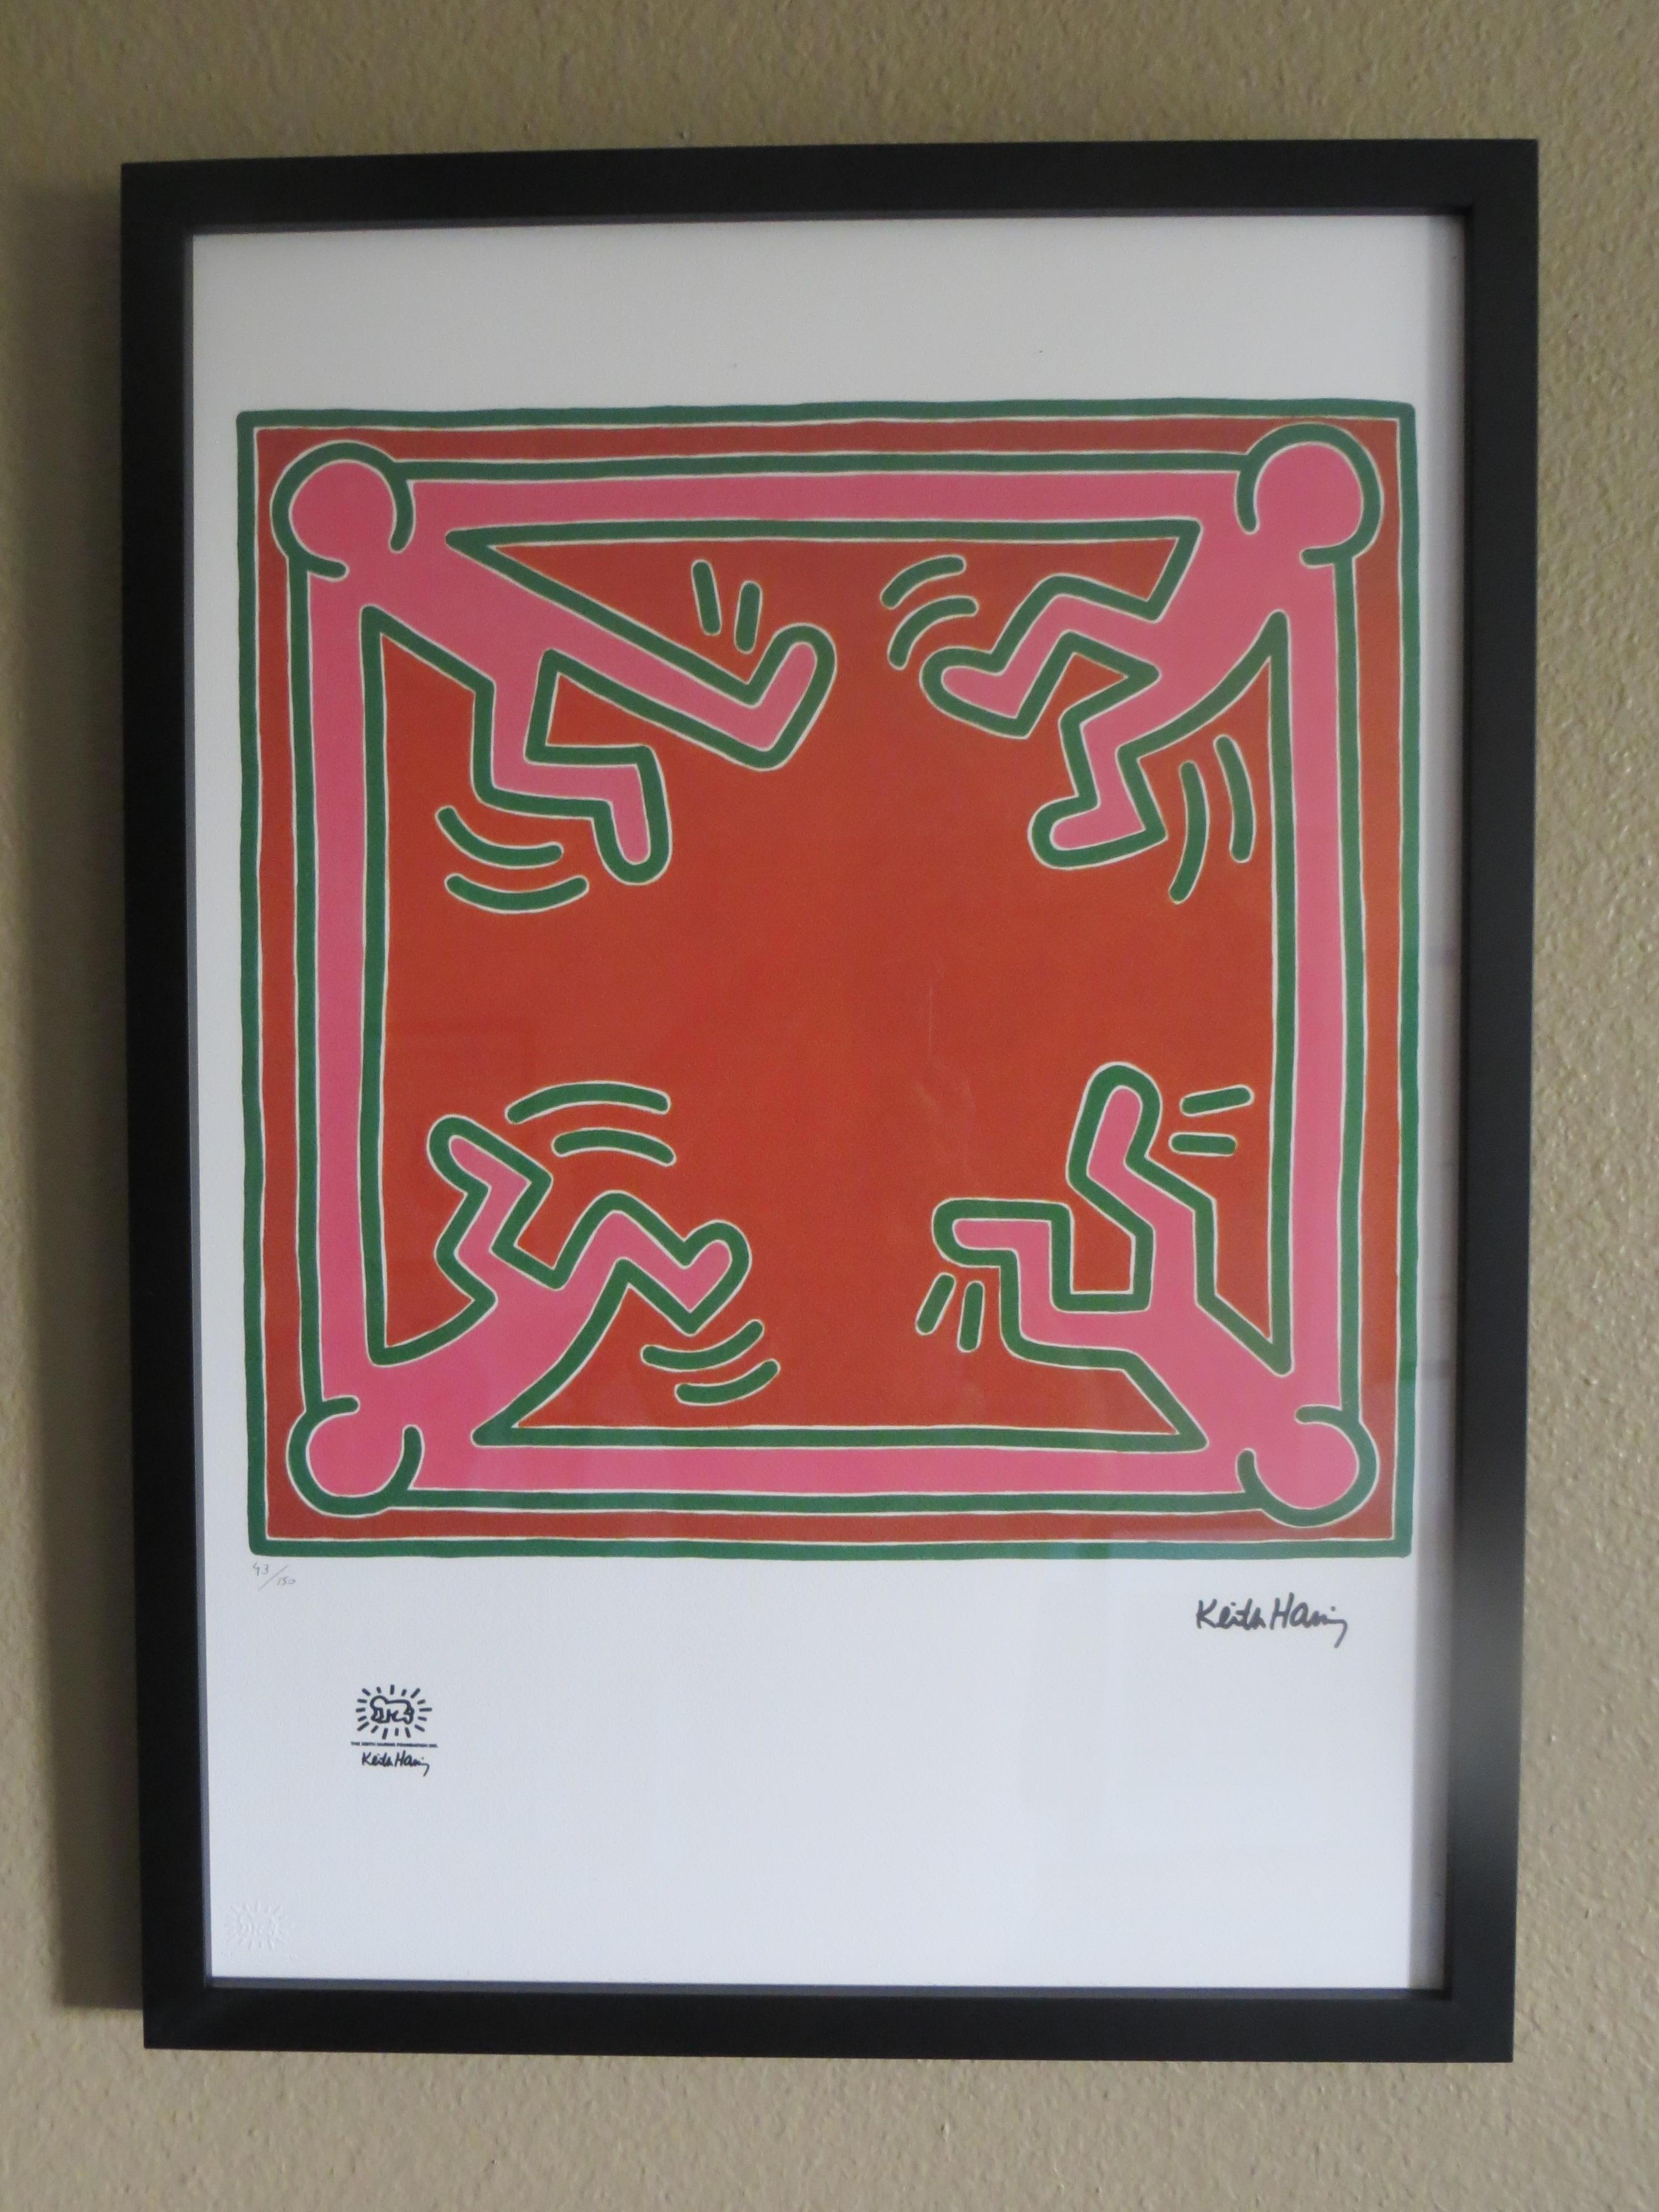 (after) Keith Haring Figurative Print -   After Keith Haring,  Lithograph, Numbered  43/150